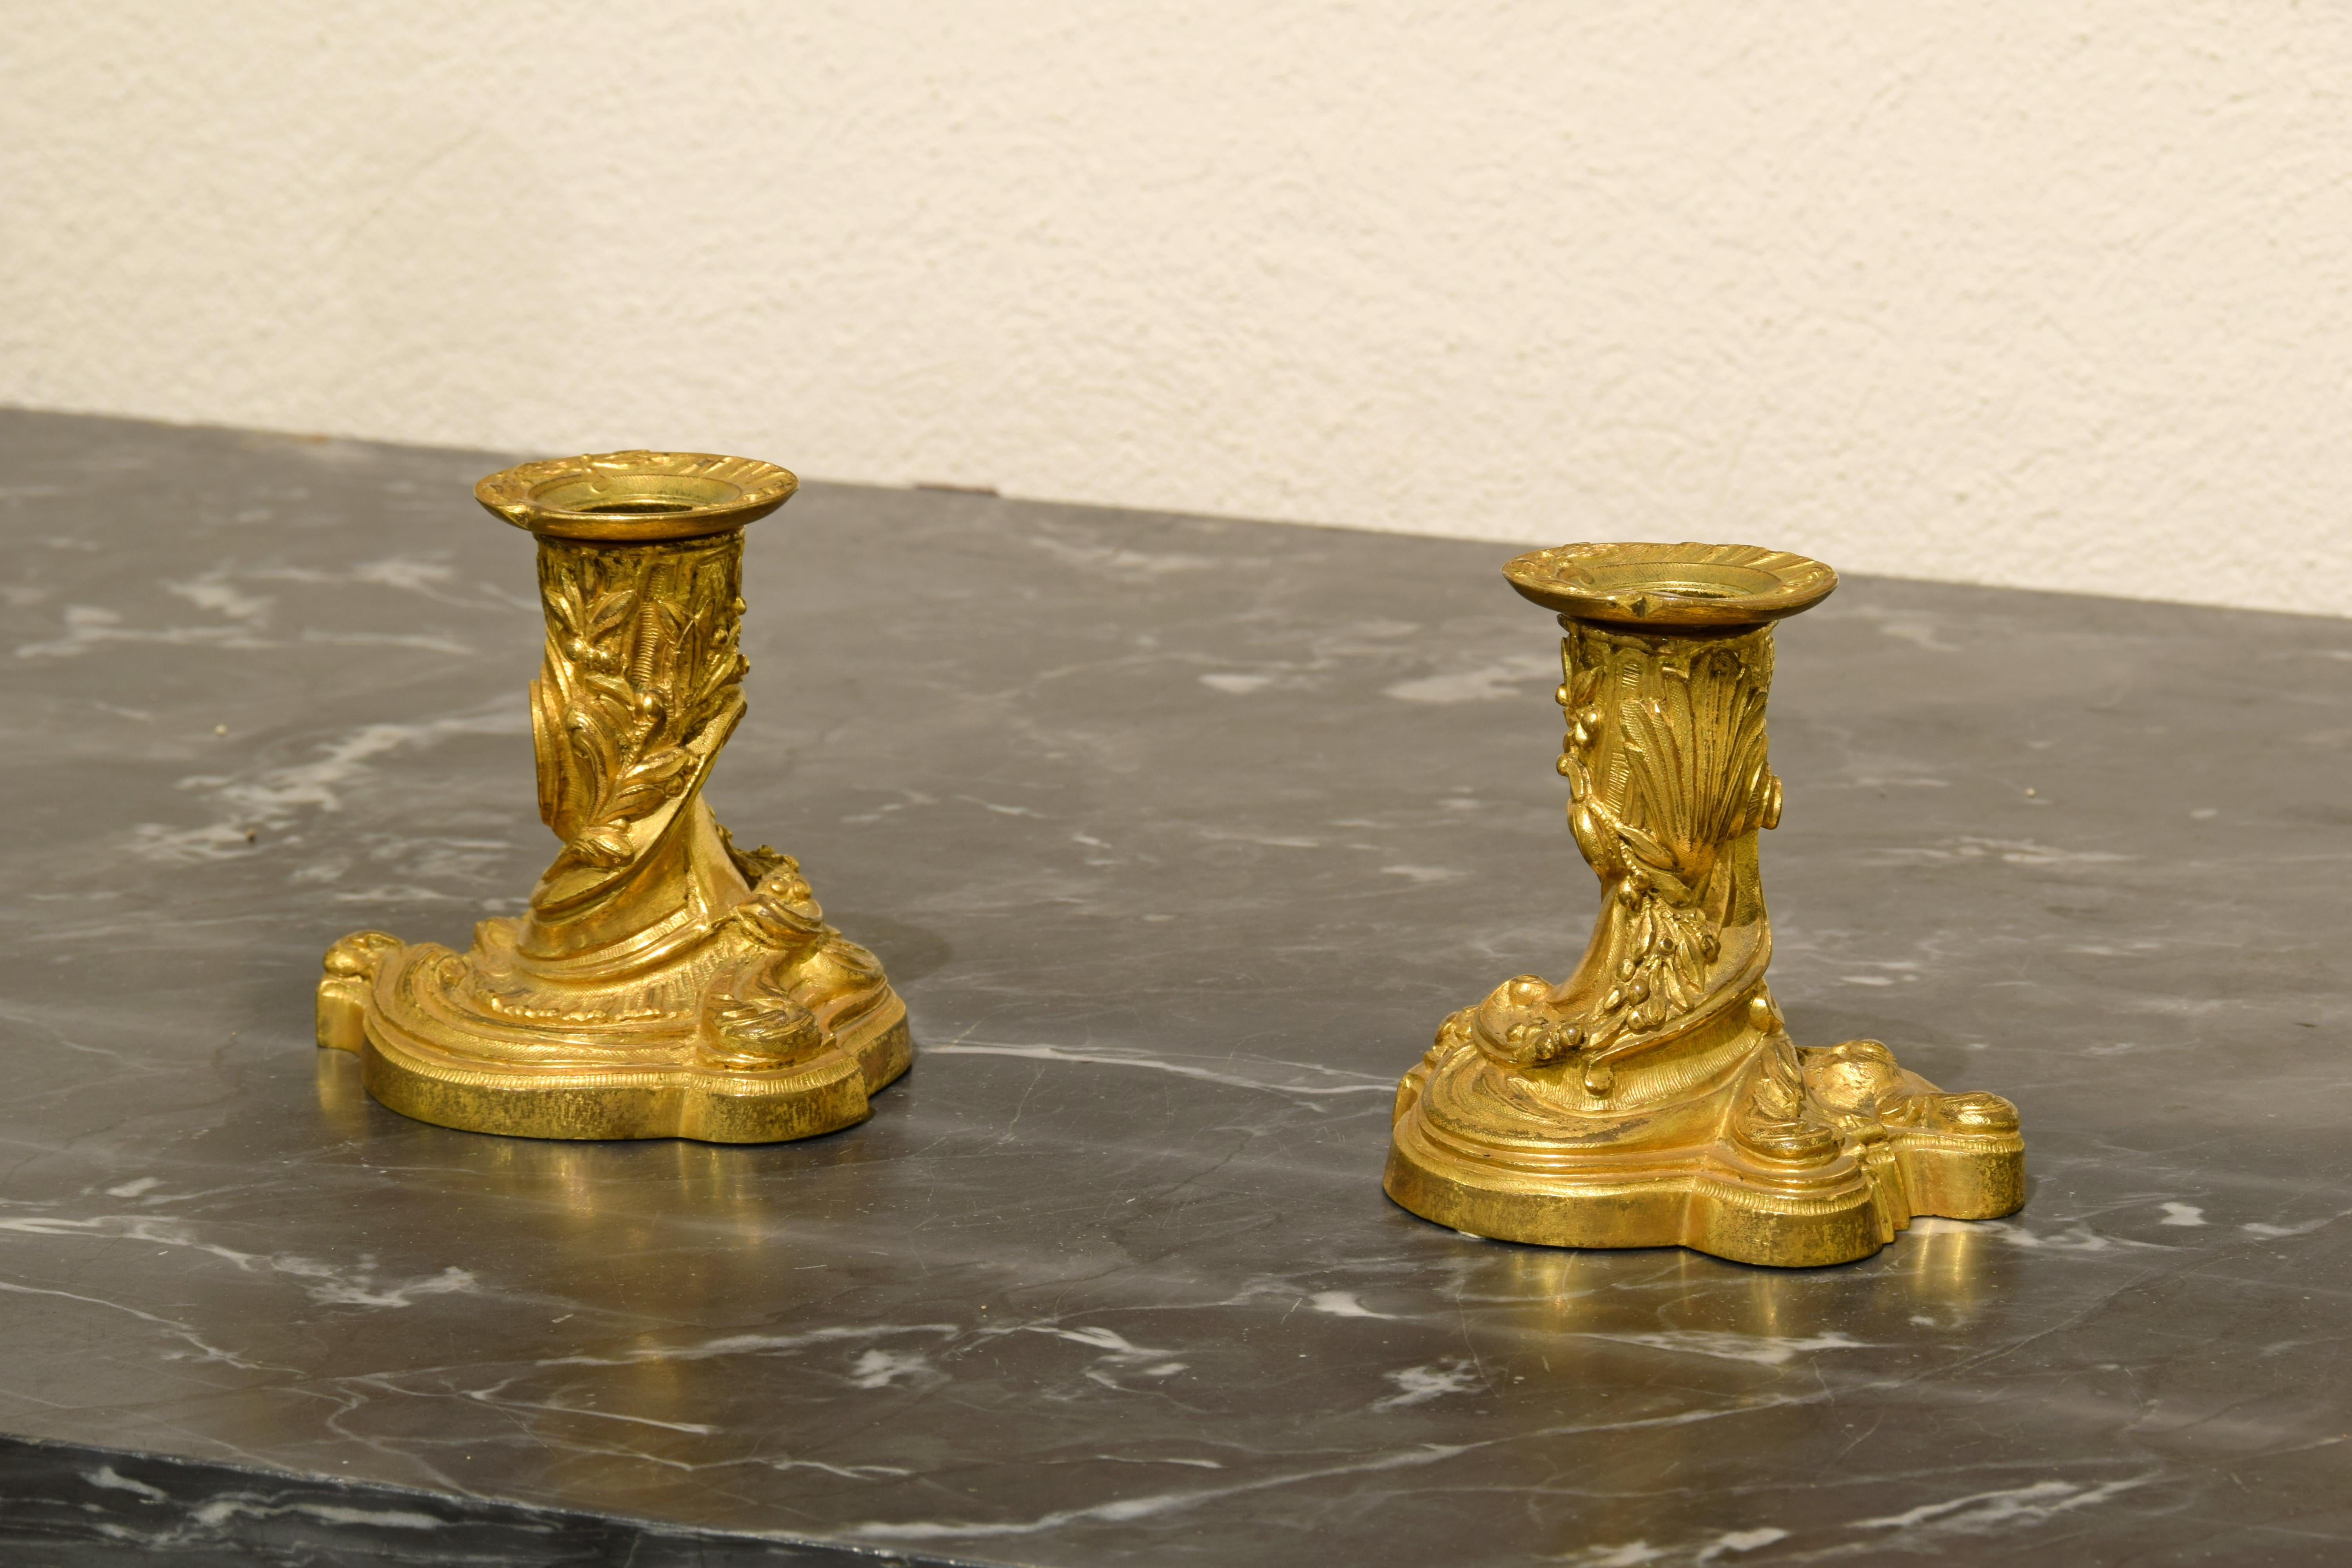  19th Century, Pair of French Gilt Bronze Candlesticks, Louis XV Style For Sale 4